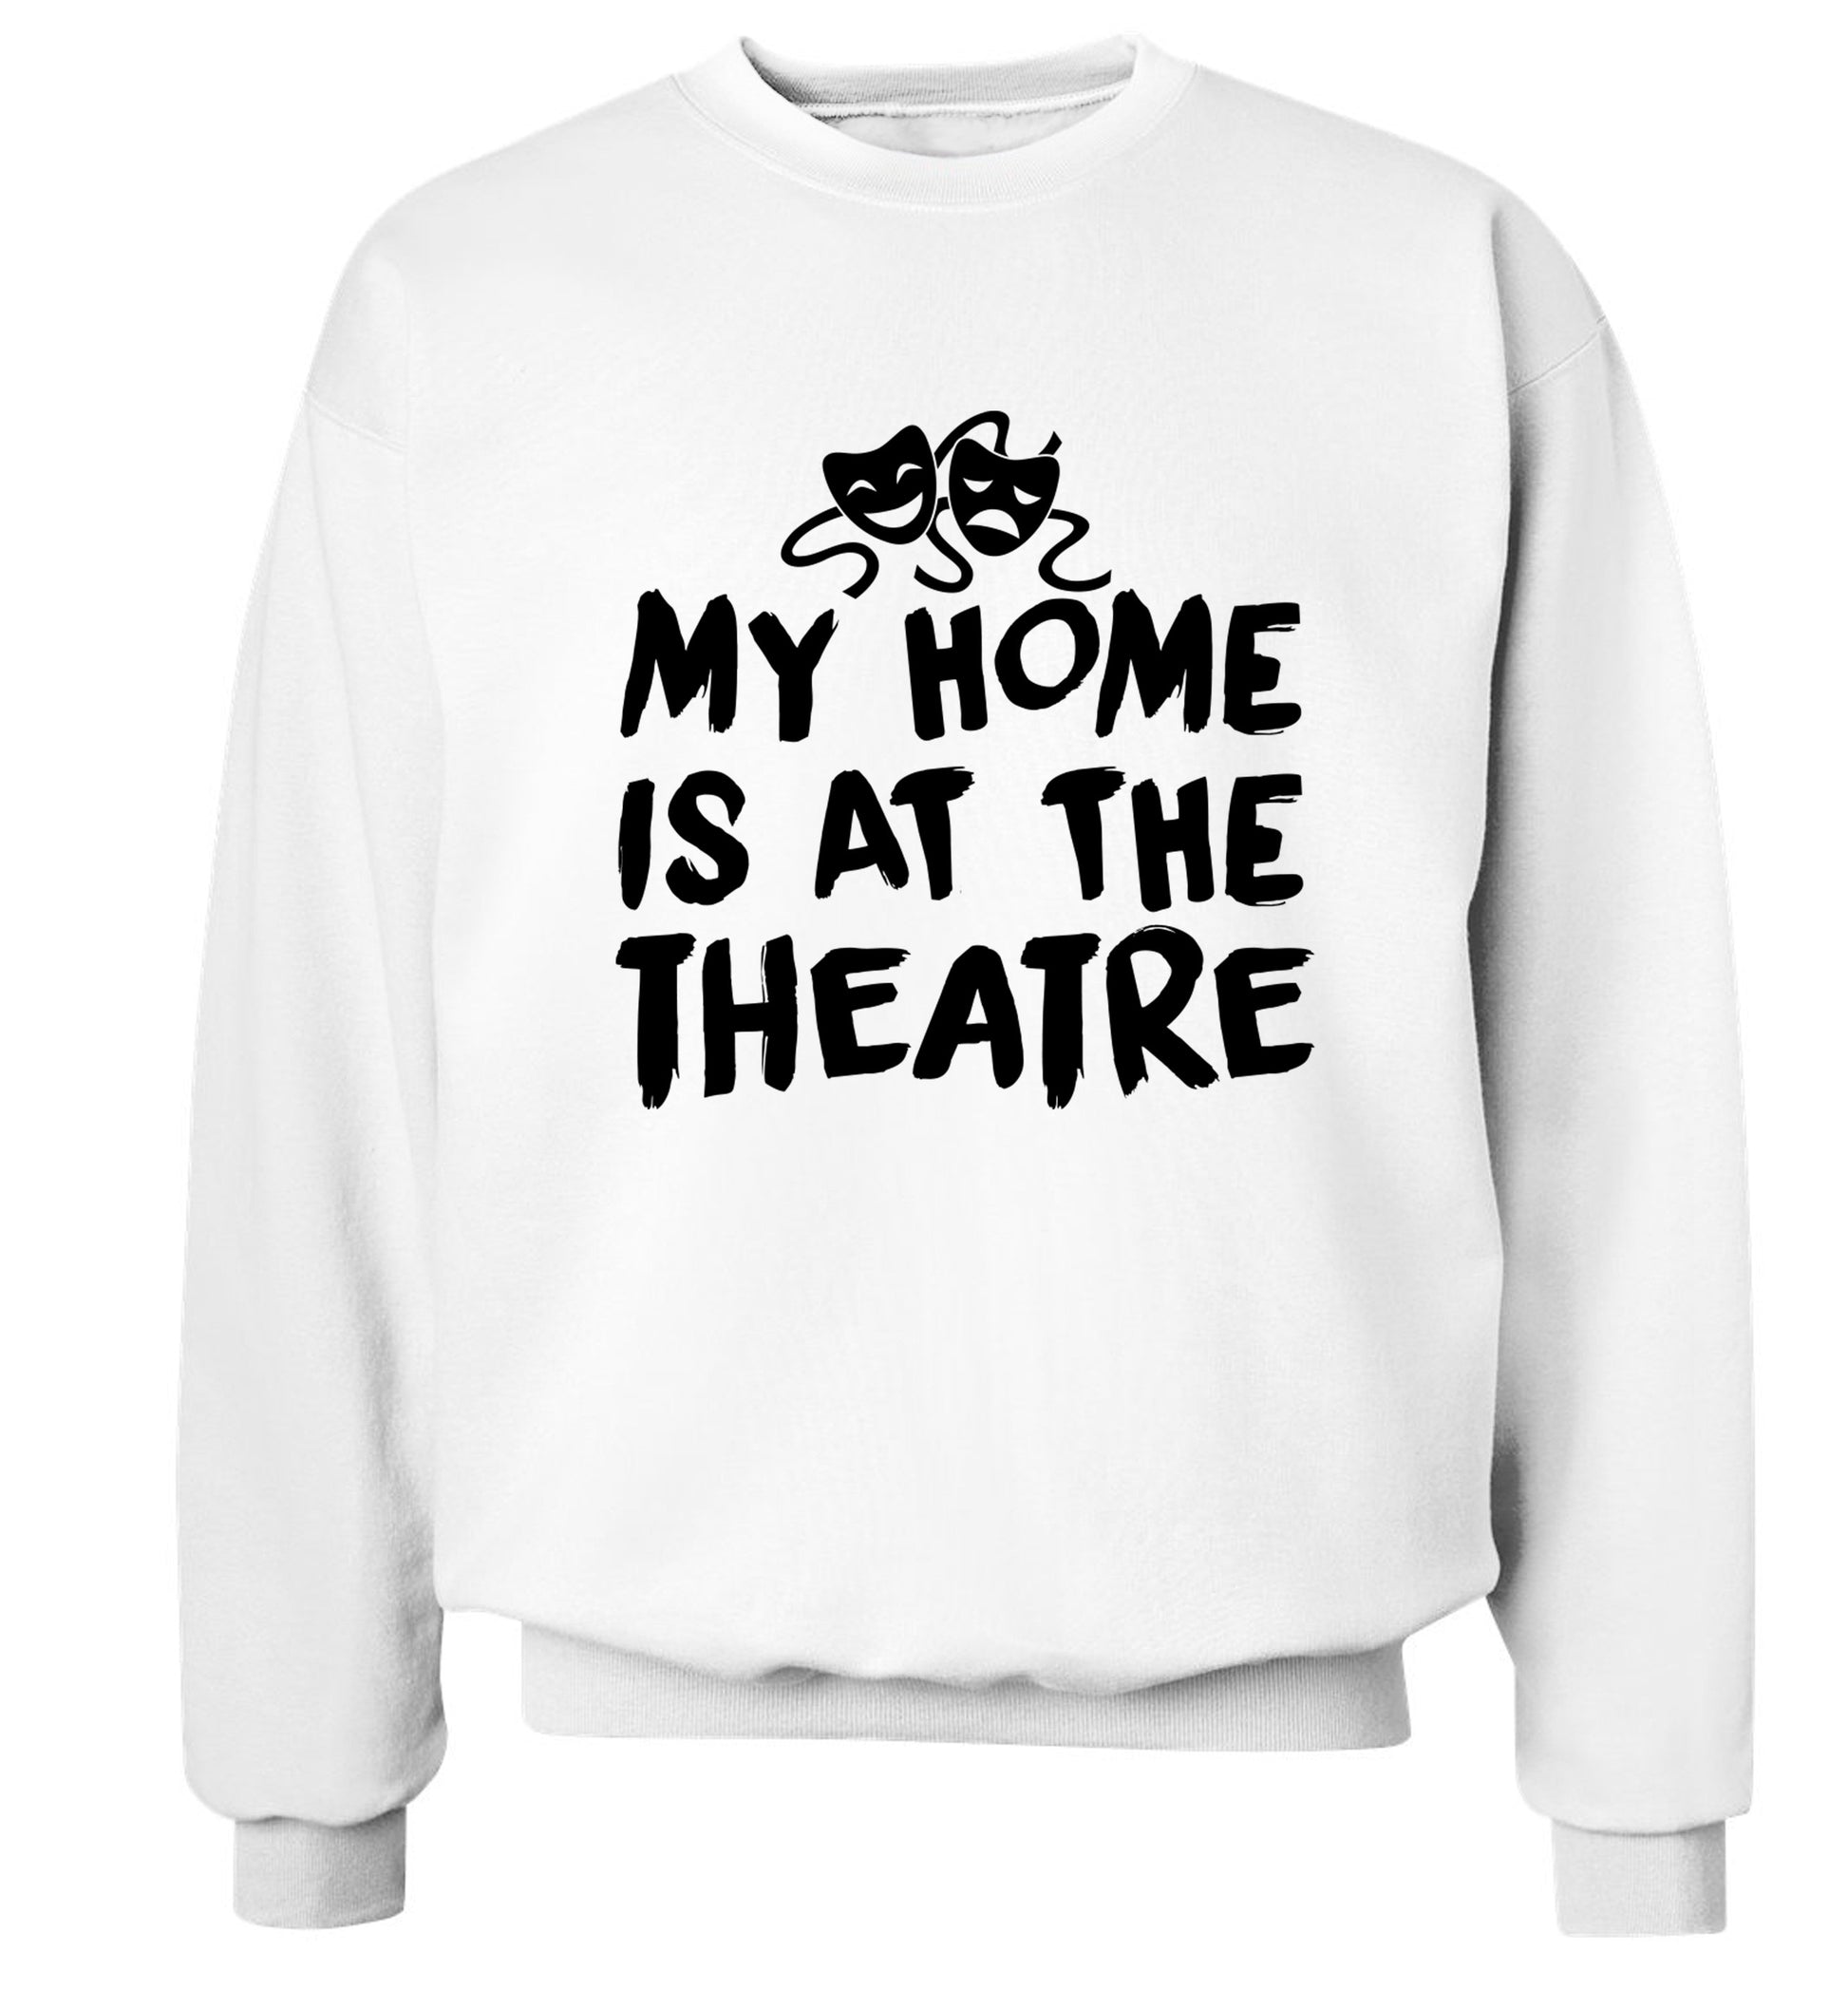 My home is at the theatre Adult's unisex white Sweater 2XL